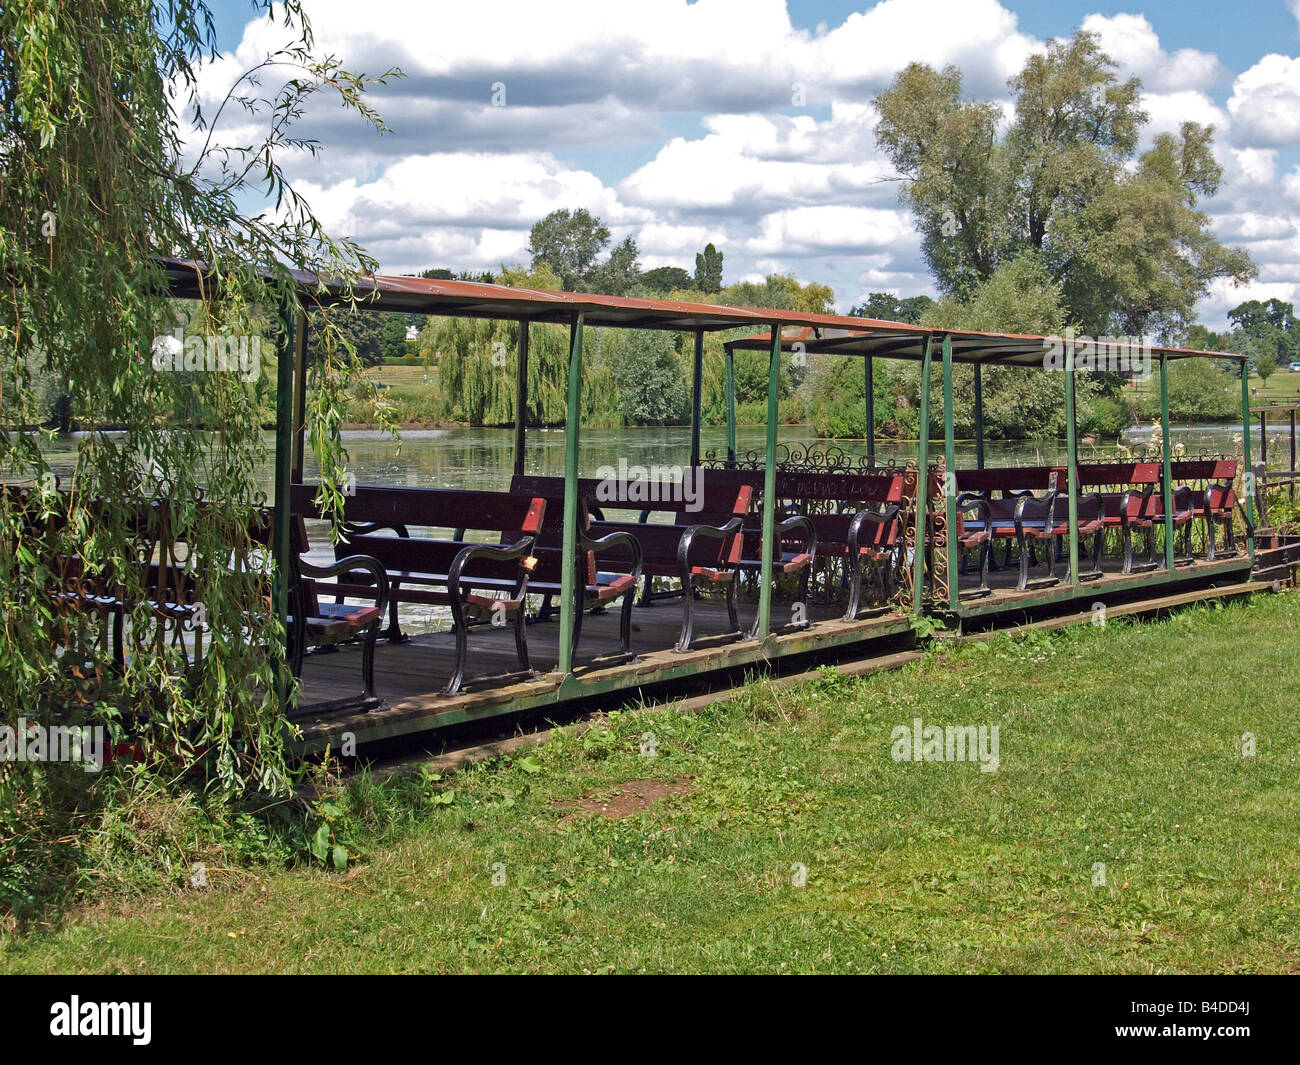 Disused railway carriages, now used as park seats. Stock Photo